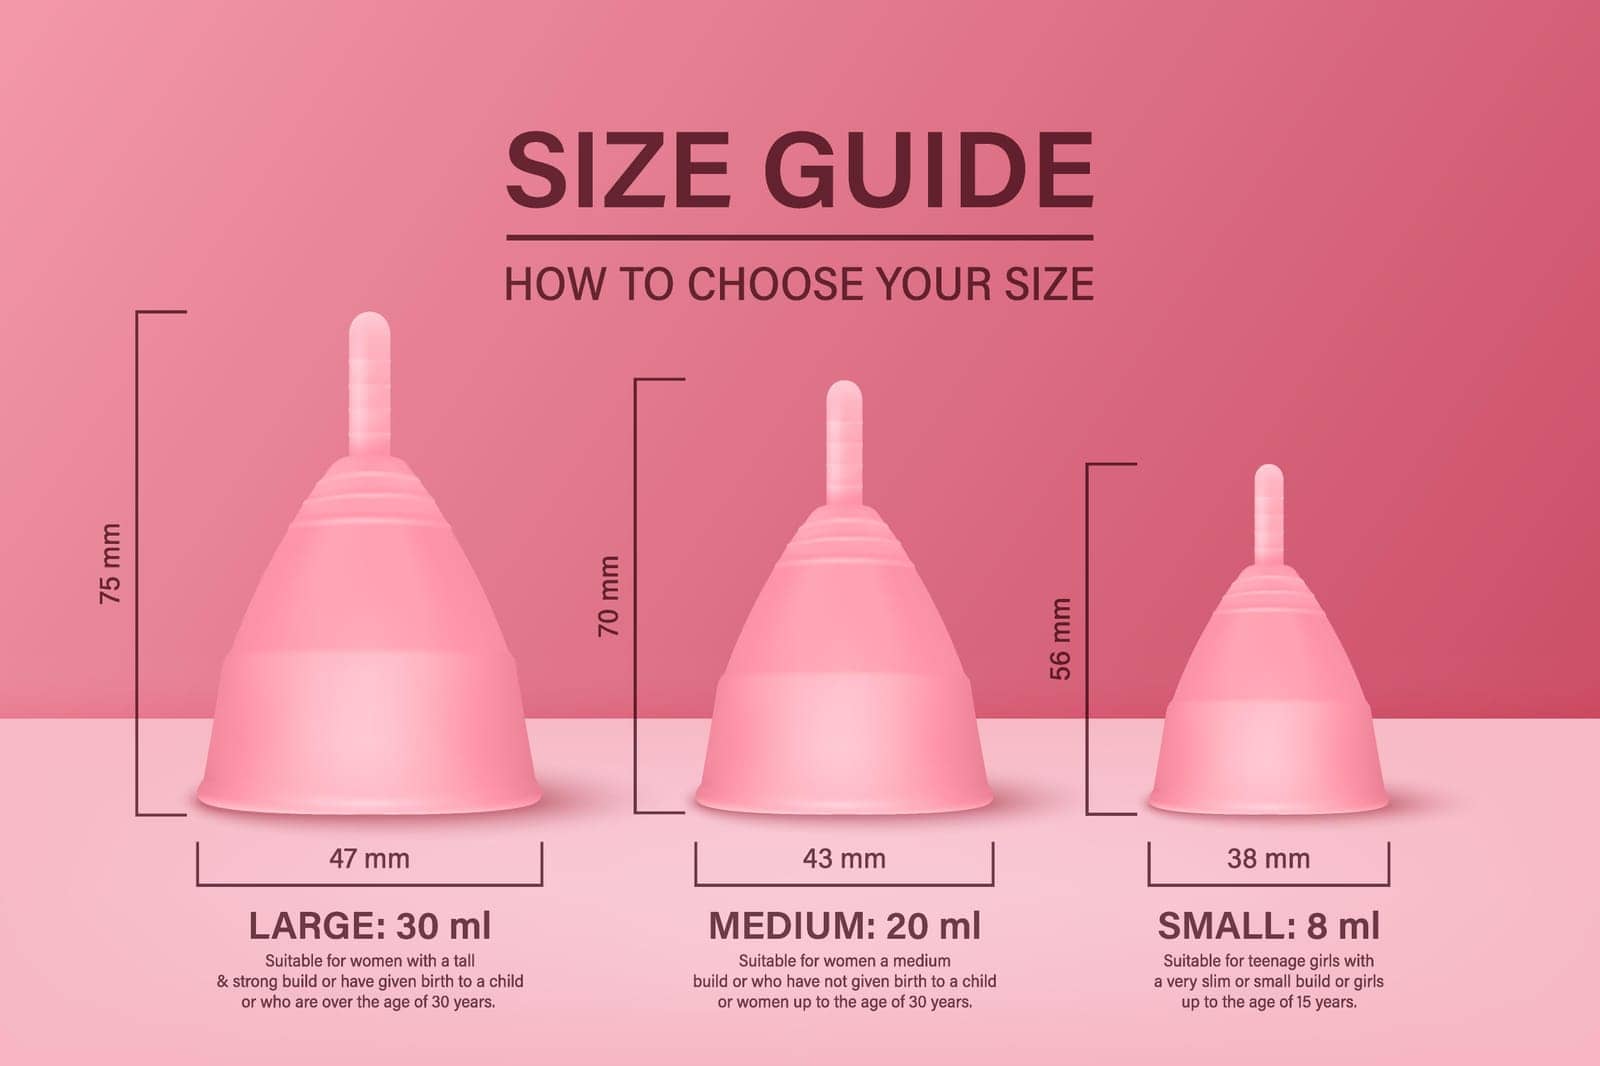 Vector 3d Realistic Pink Menstrual Hygiene Silicone Cups on Pink Background - Size Guide. Feminine Hygiene Infographics. Women s Health, Hygiene Concept, Menstrual Cup Design Template, Banner.